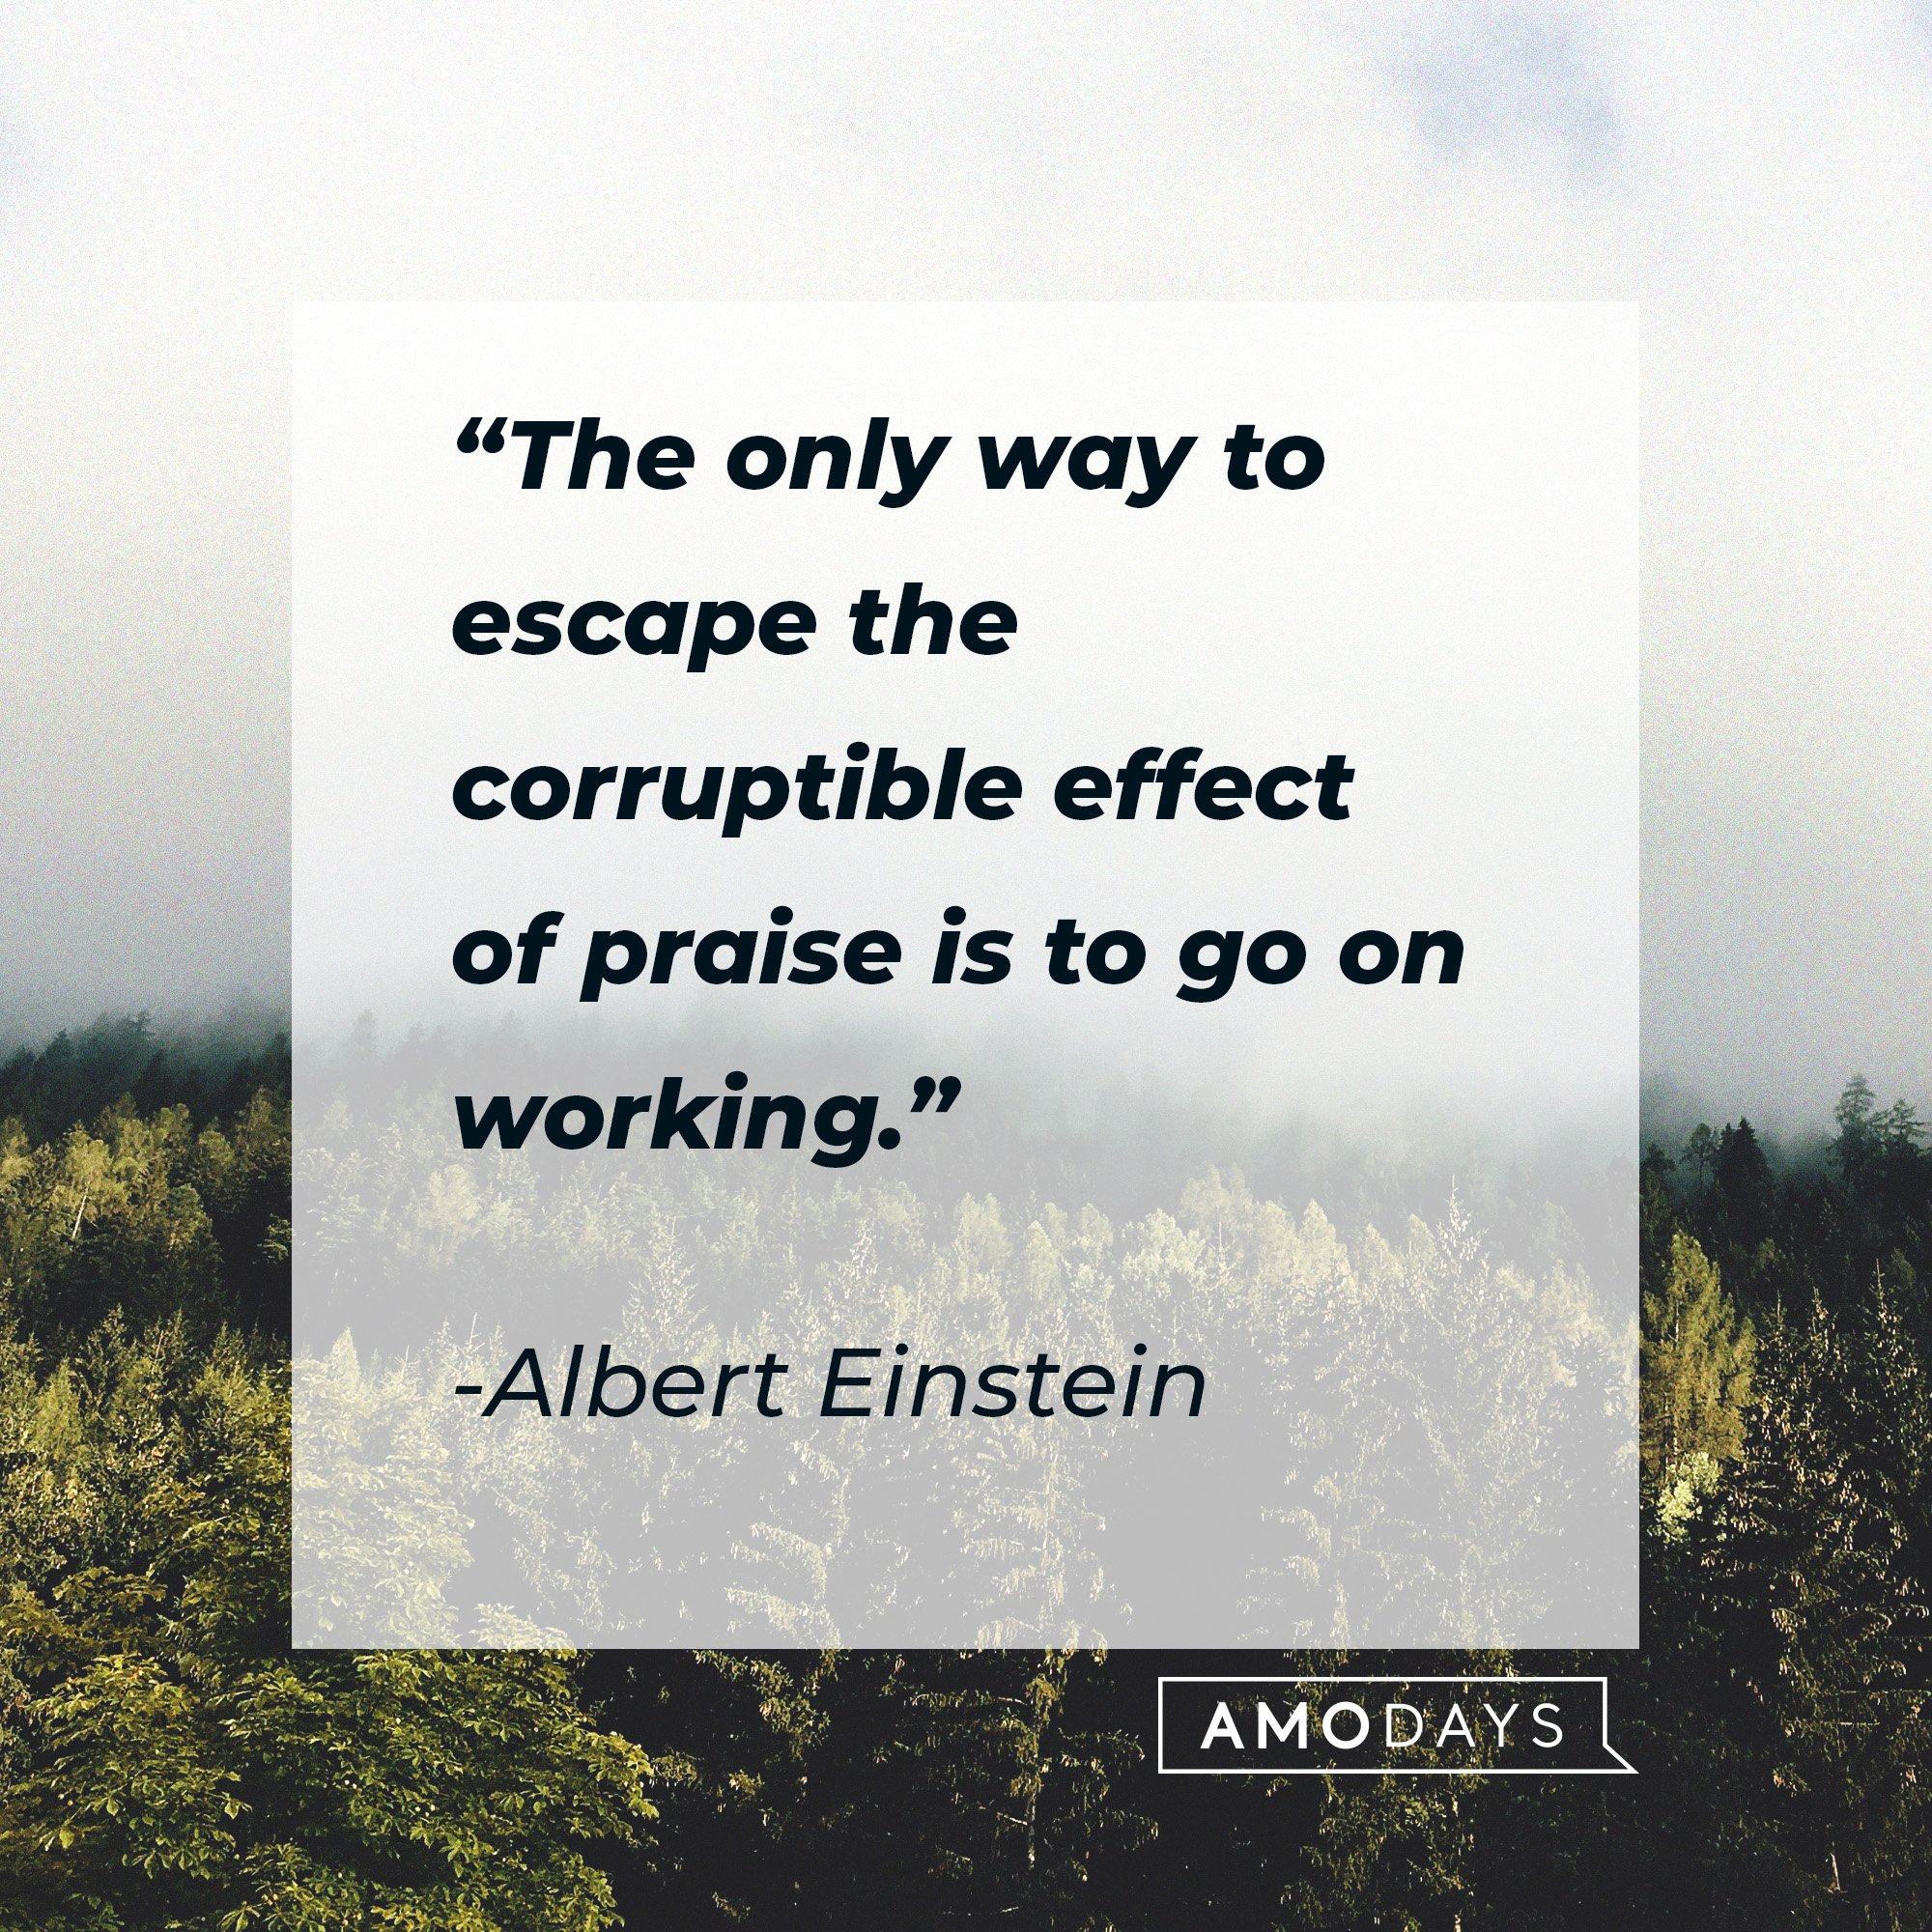  Albert Einstein's quote: “The only way to escape the corruptible effect of praise is to go on working.” | Image: AmoDays